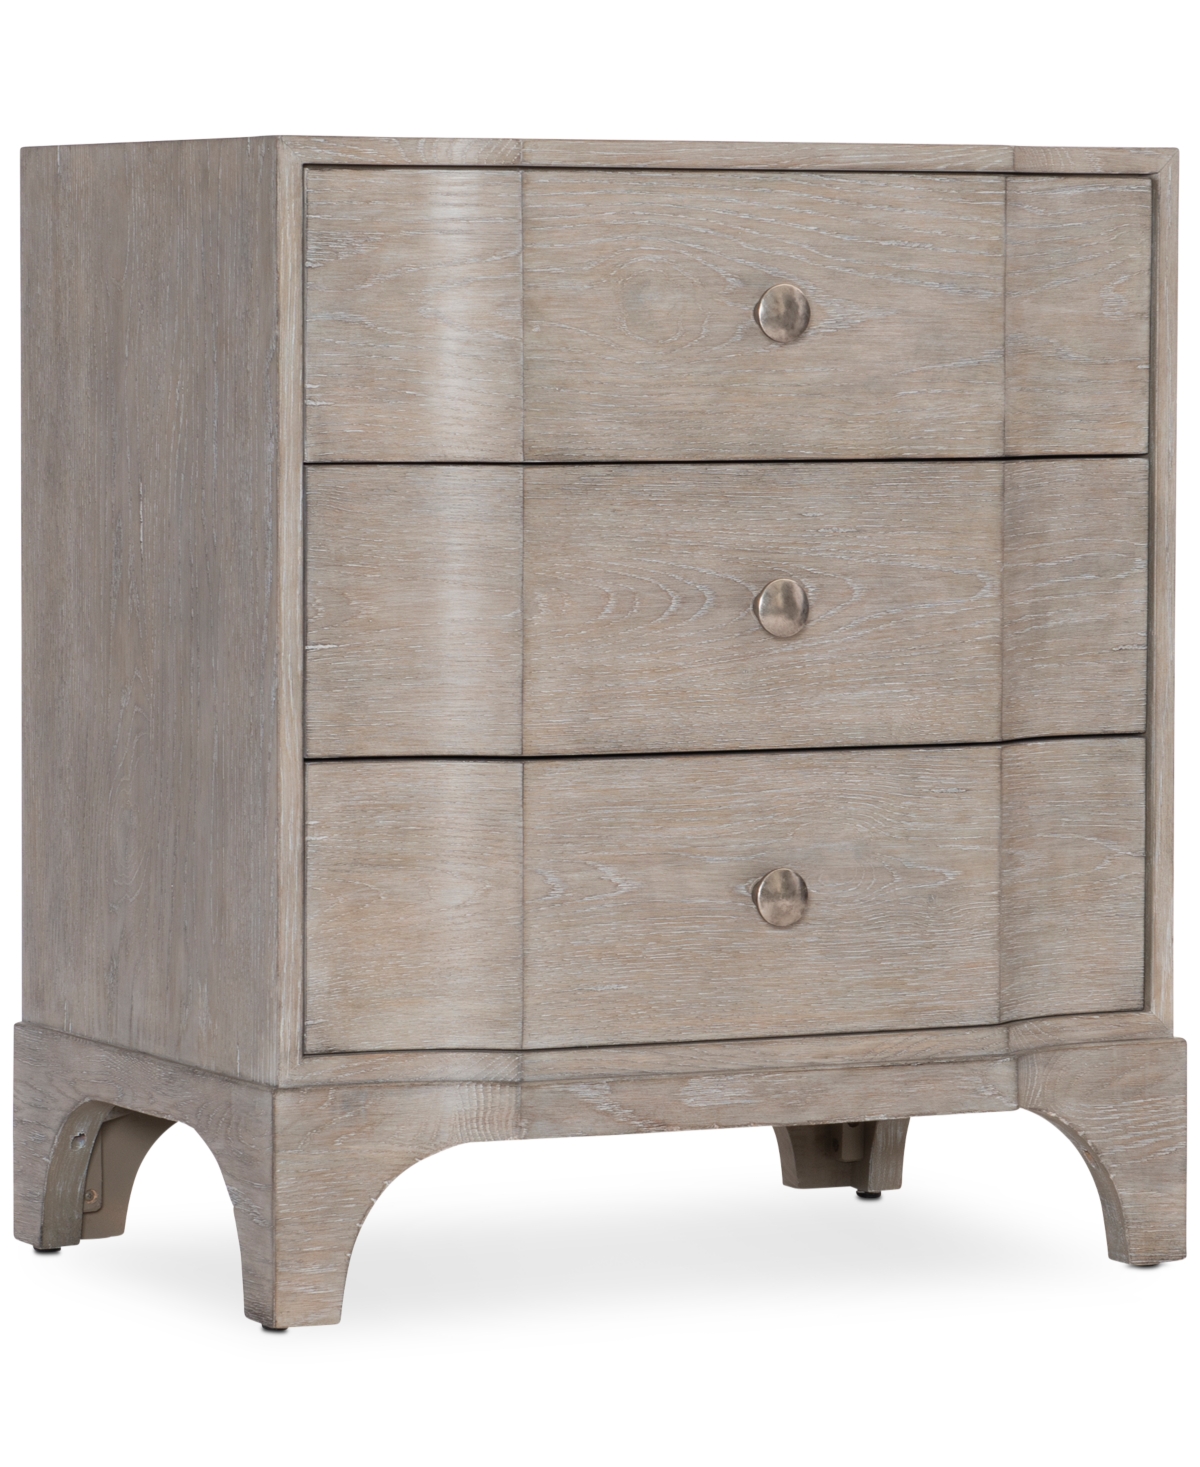 Albion Small Nightstand